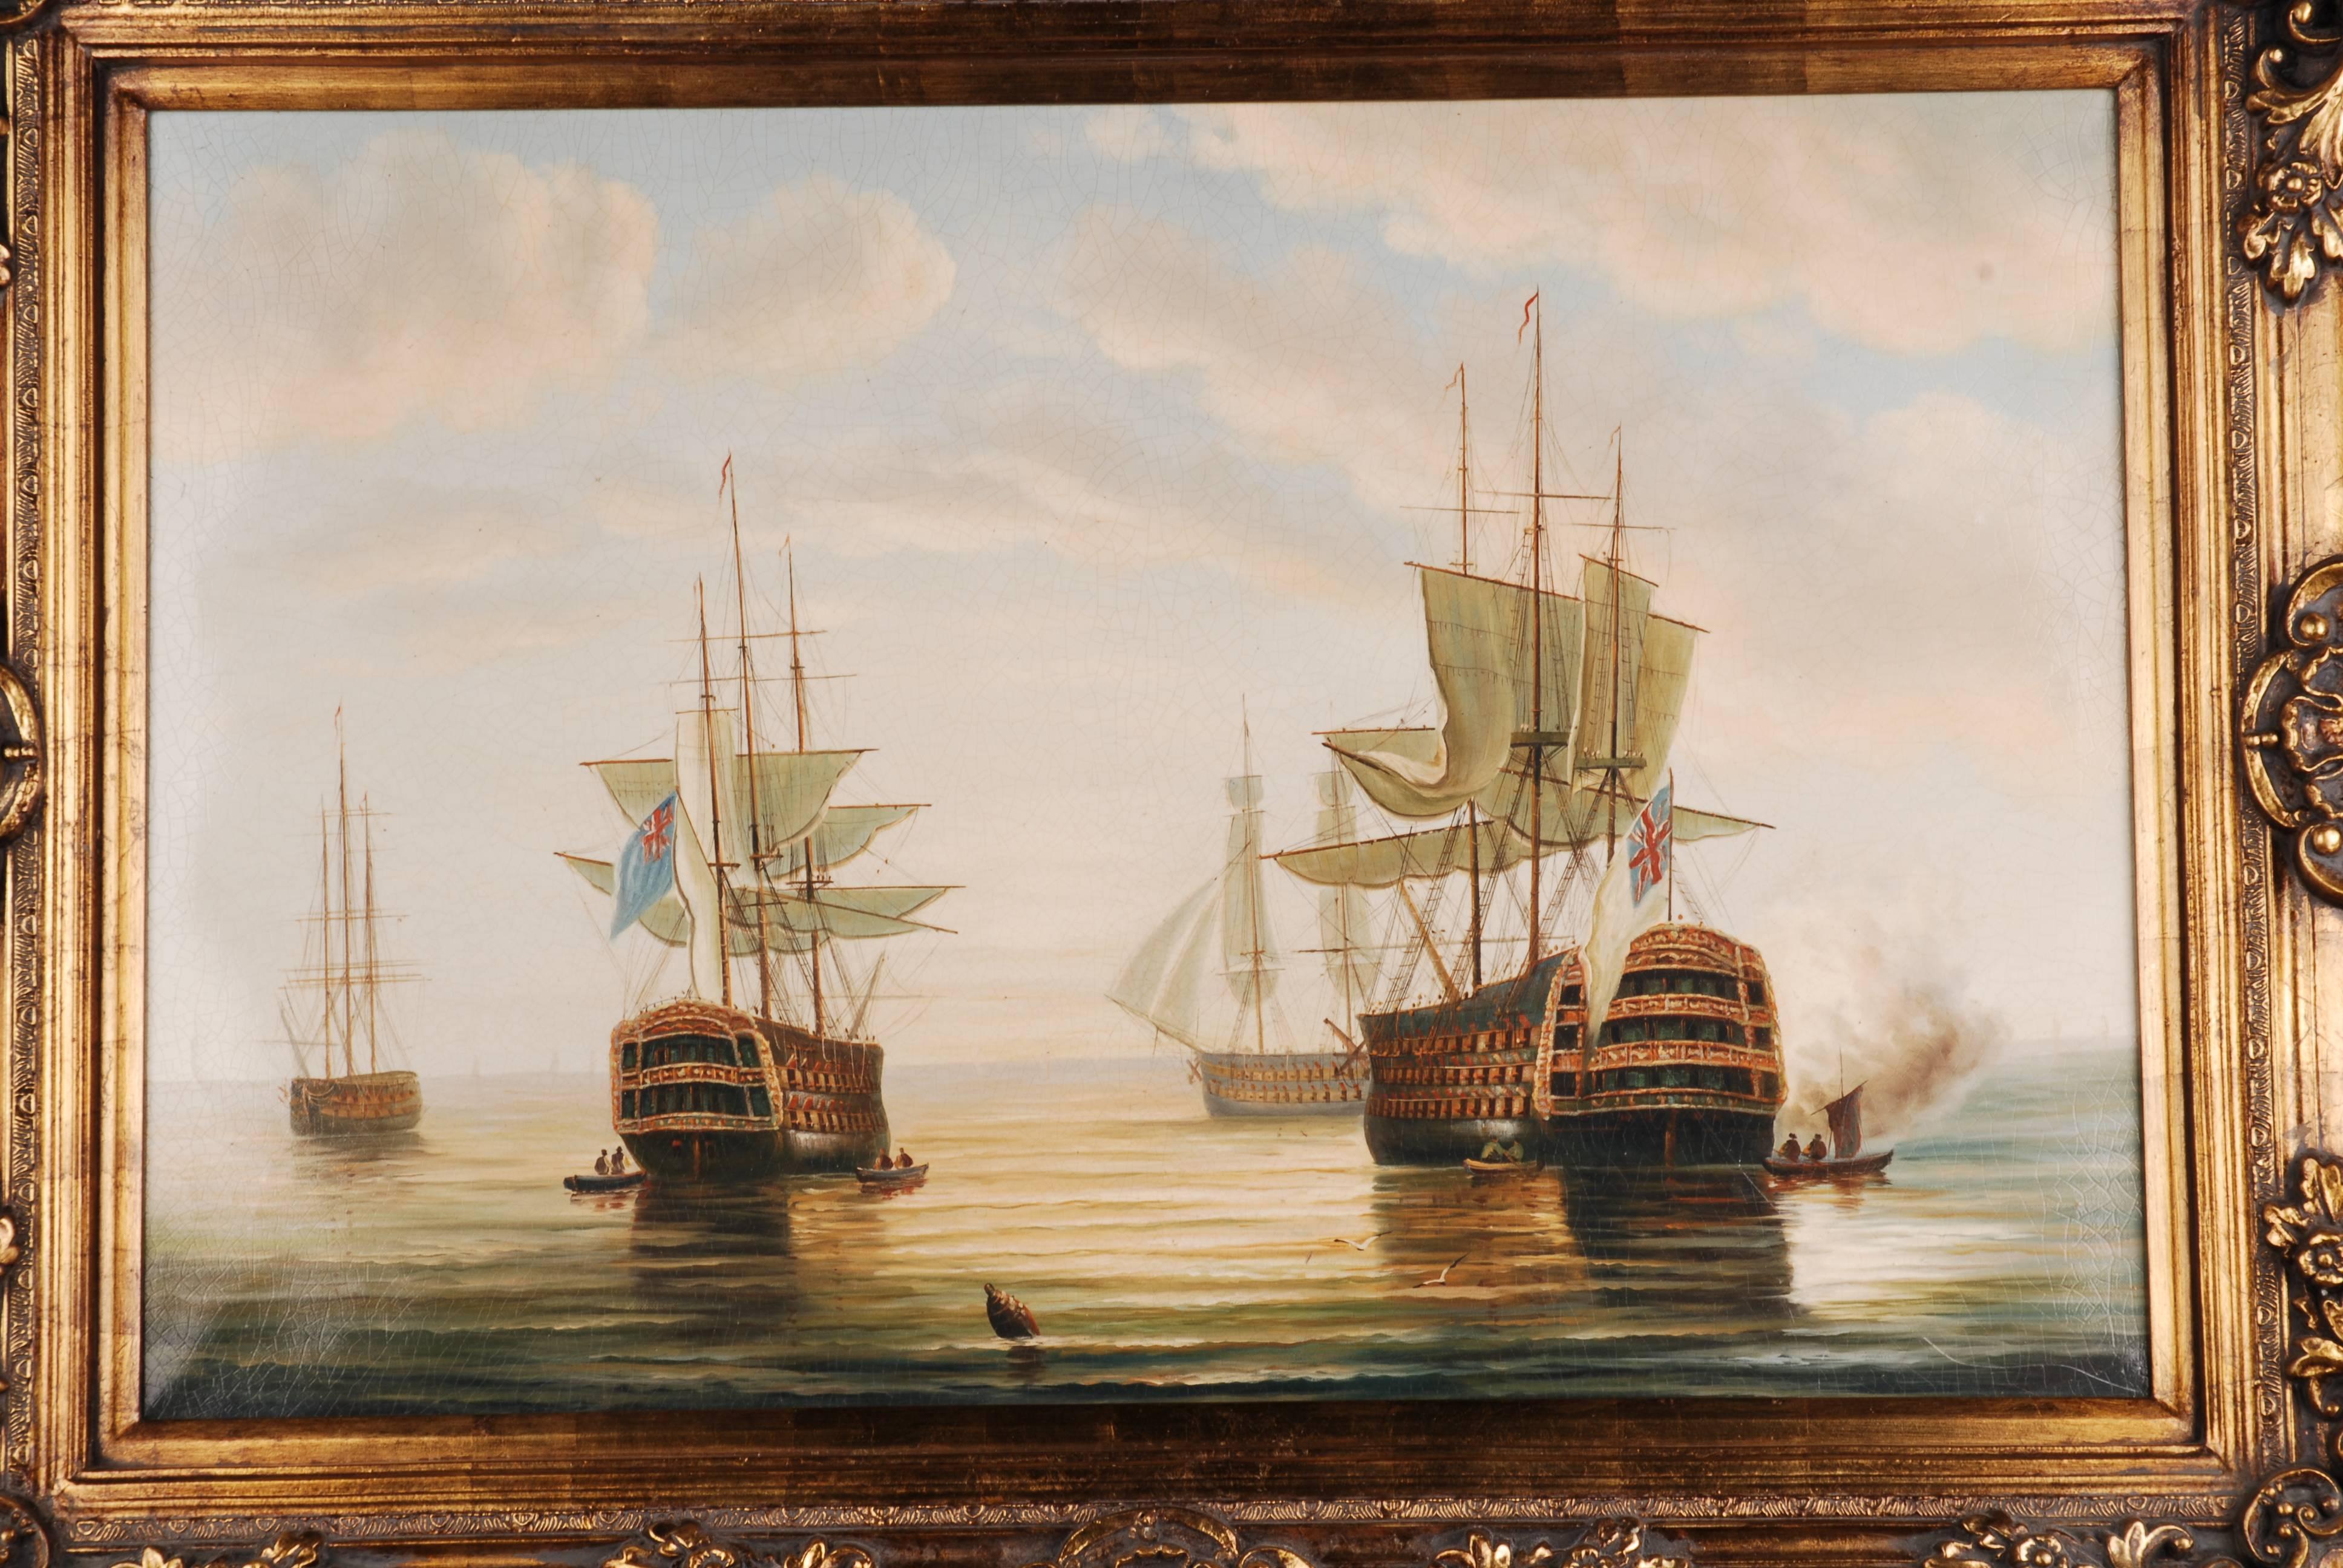 English battleships in coastal waters. Atmospherically densely painted seascape. This painting captivates by its influence of the Romanticism with a direct nature view. The most carefully executed coastal motif, shown here, is an exemplary example